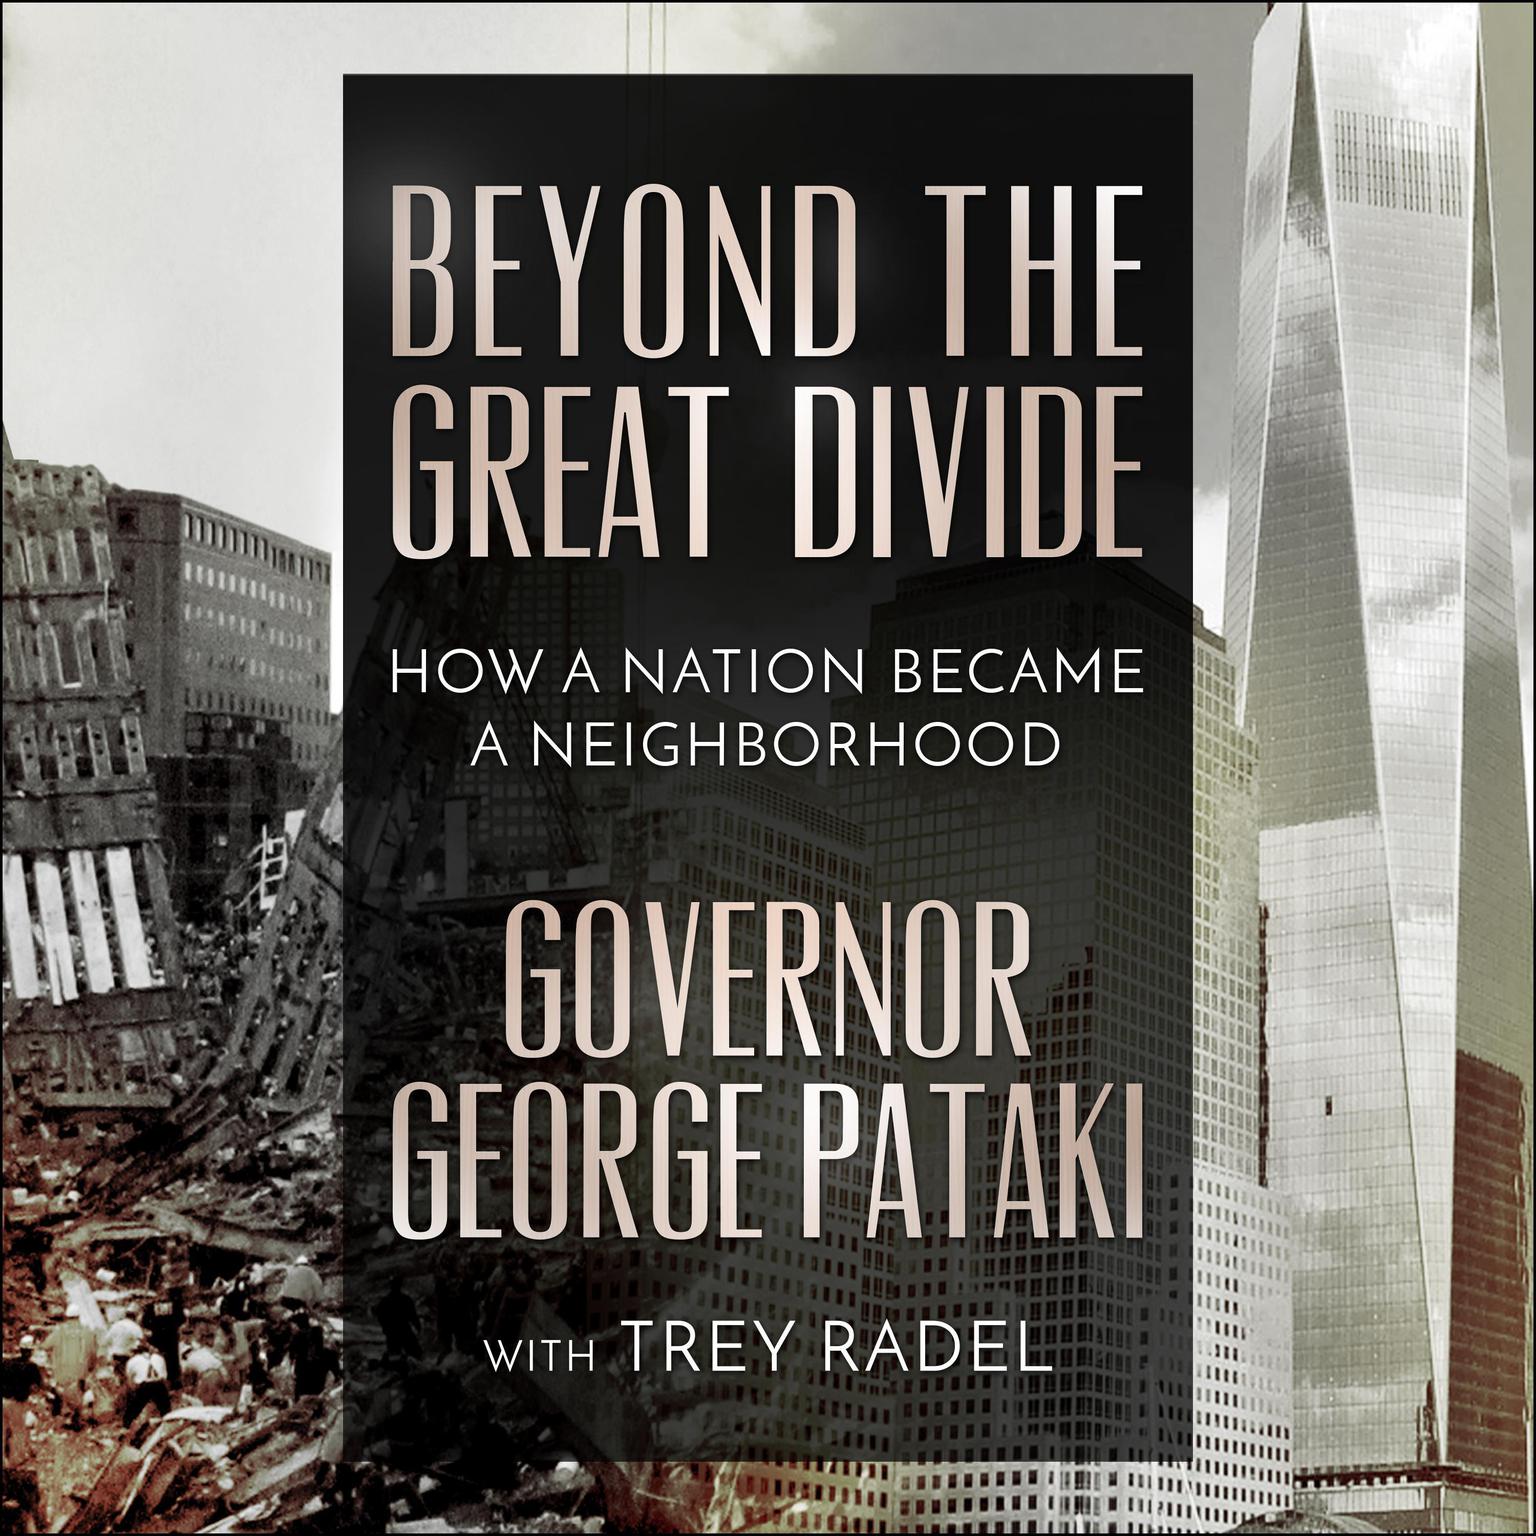 Beyond the Great Divide: How A Nation Became A Neighborhood Audiobook, by Governor George Pataki